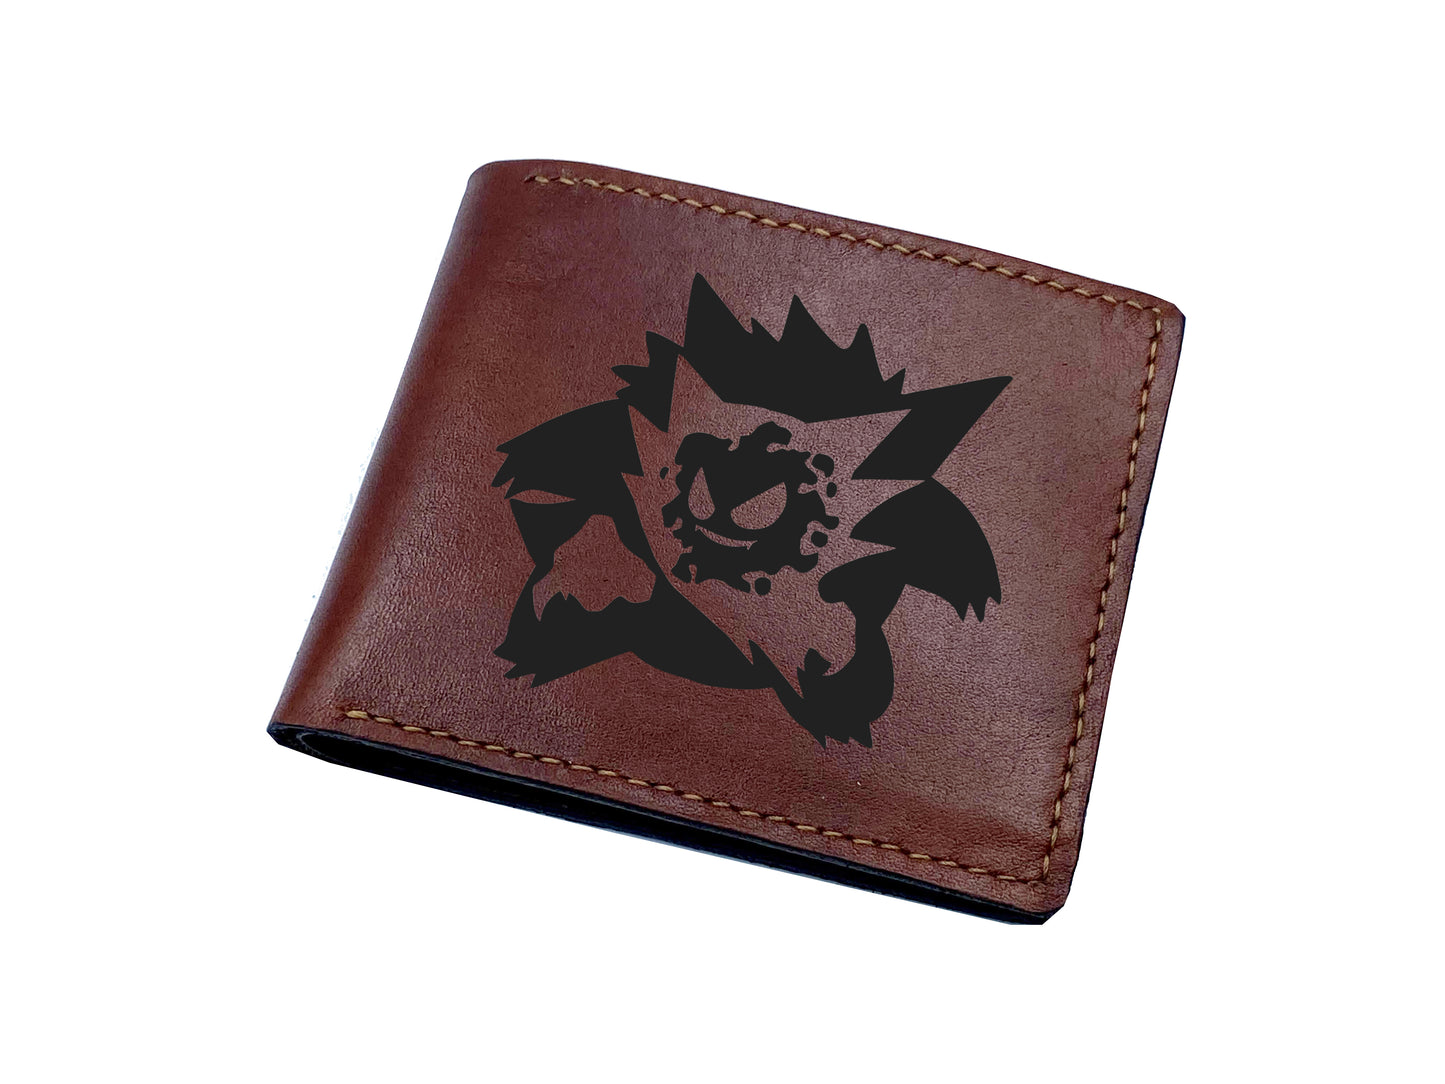 Mayan Corner - Personalized leather wallet, pokemon genuine leather men's wallet, pokemon evolution gift idea for boyfriend, husband, colleague